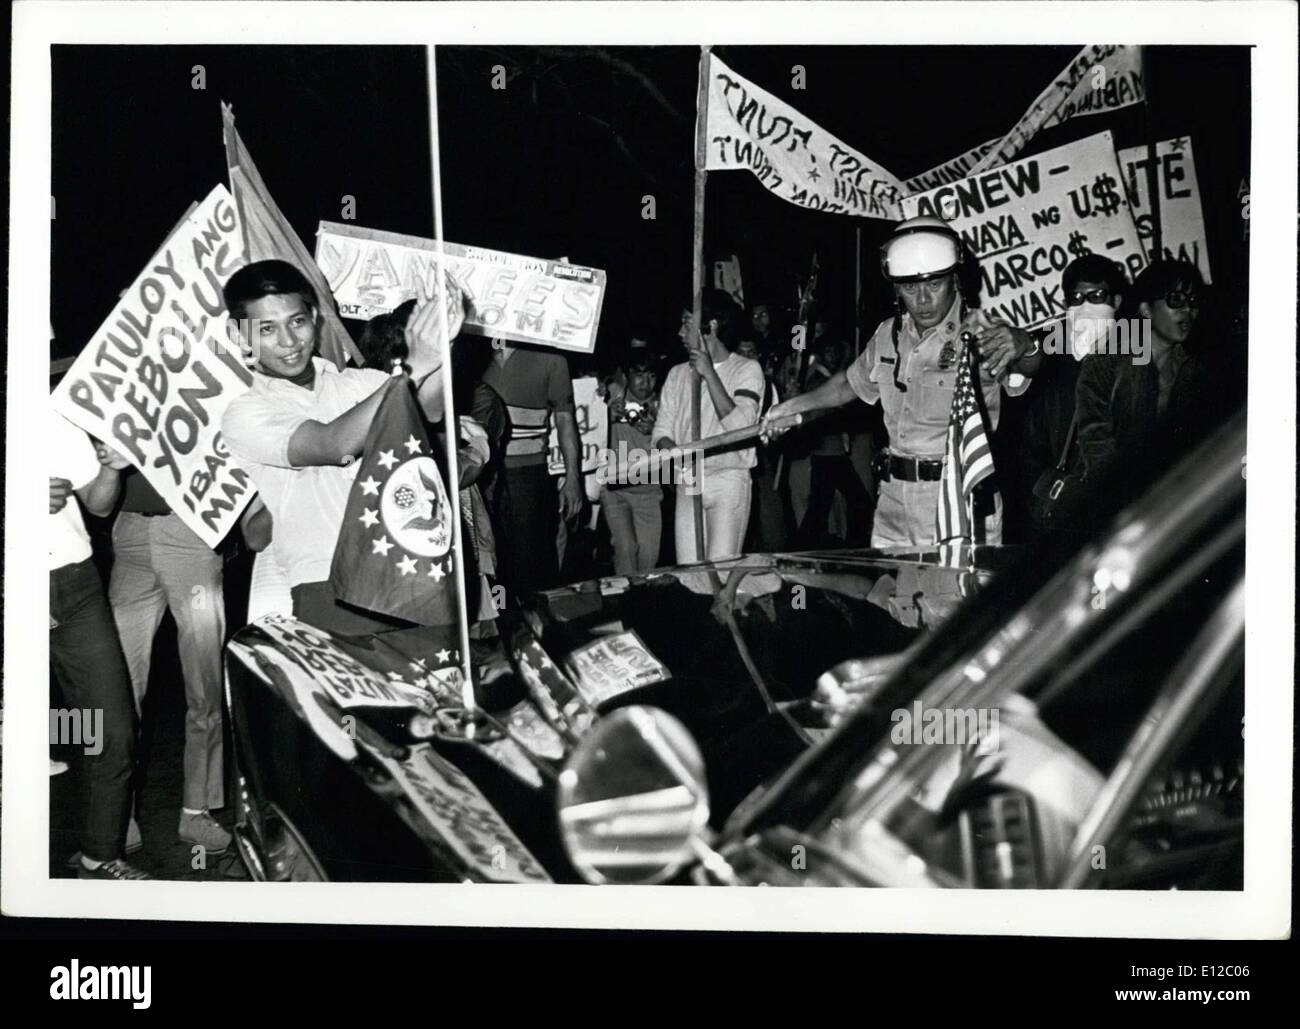 Dec. 16, 2011 - Anti-American students besiege car of Vice-President Spiro Agnew during his visit to the Philippines Jan 1970 for the Inauguration of President Ferdinand E. Marcos No violence broke out. Stock Photo